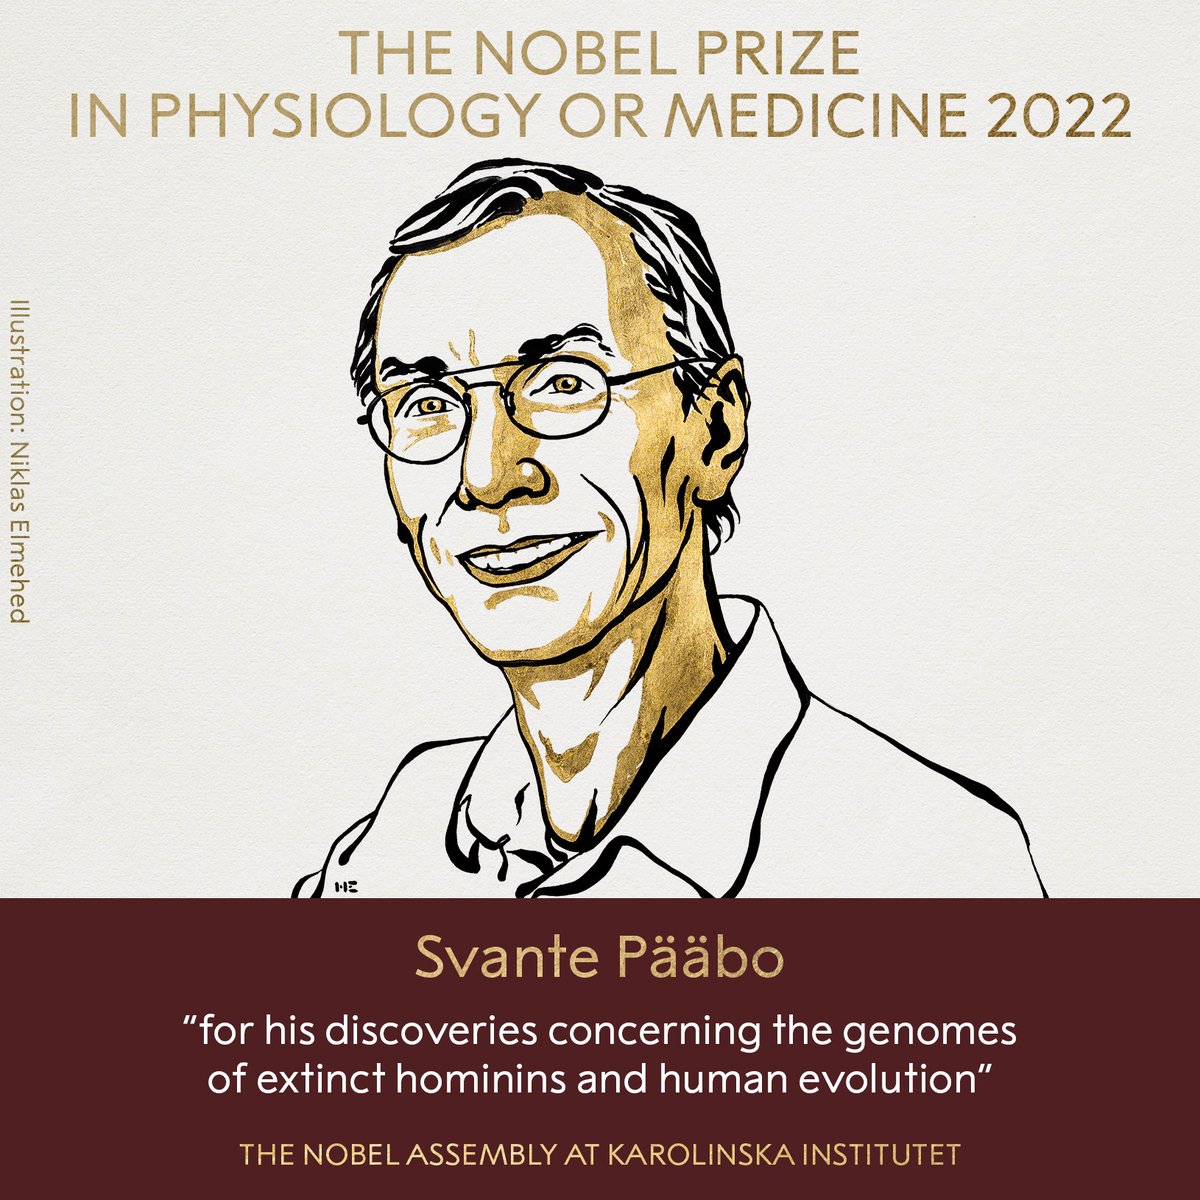 BREAKING NEWS: The 2022 #NobelPrize in Physiology or Medicine has been awarded to Svante Pääbo “for his discoveries concerning the genomes of extinct hominins and human evolution.”